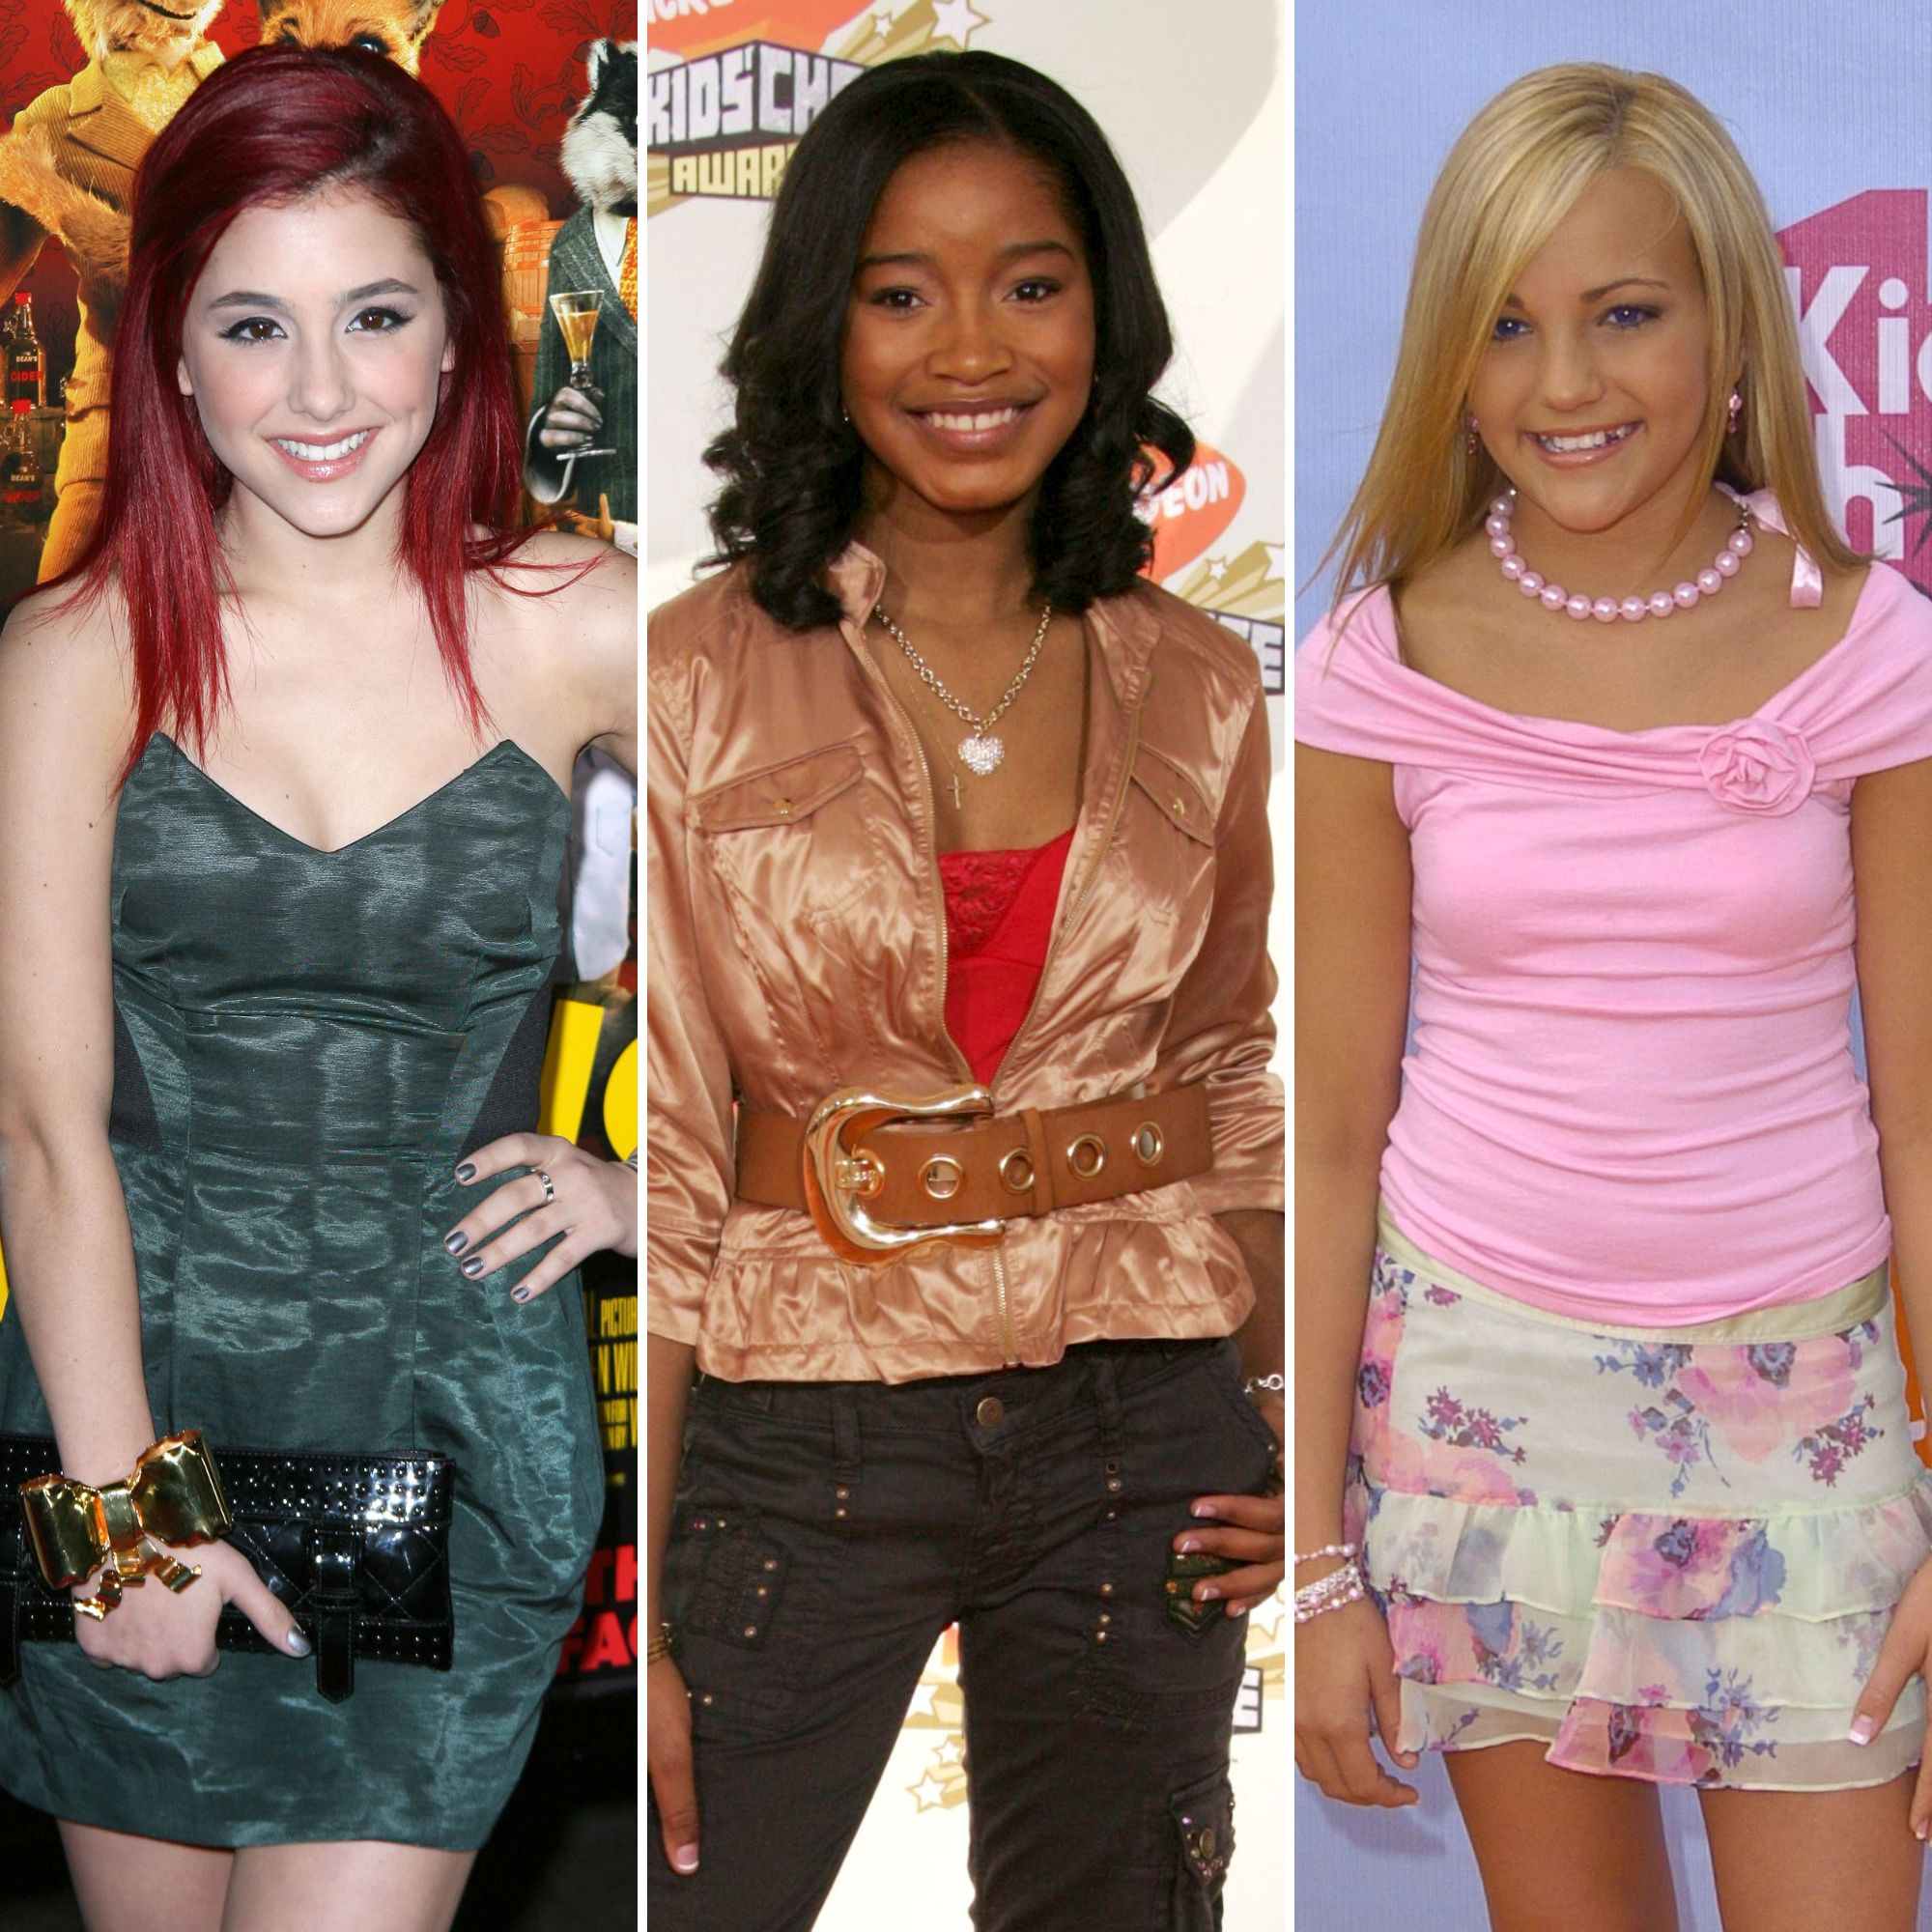 Petite Brunette Teens Showing - Nickelodeon Girls Who Look Different: Then-And-Now Pics